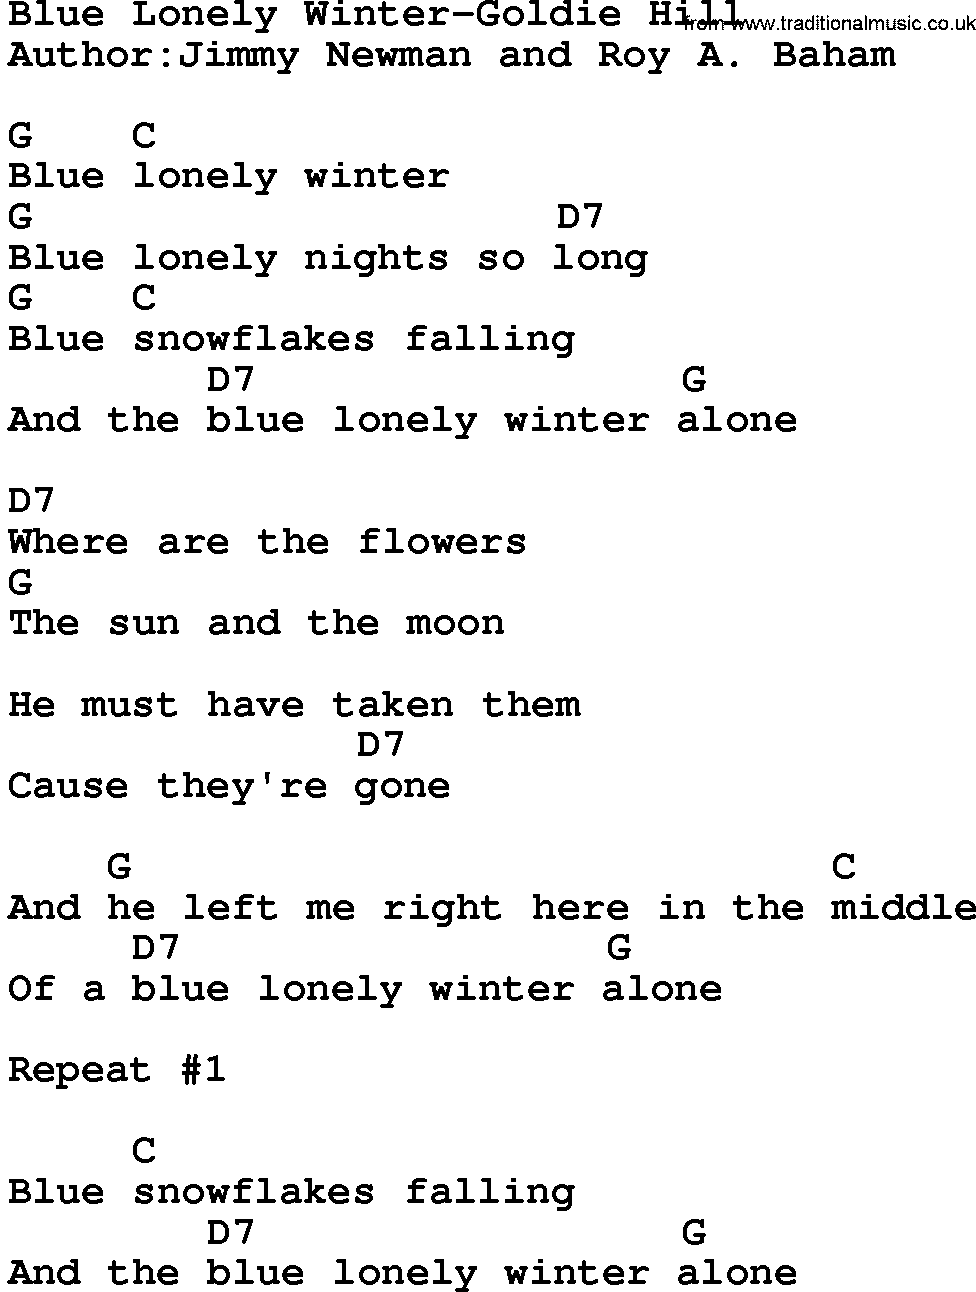 Country music song: Blue Lonely Winter-Goldie Hill lyrics and chords